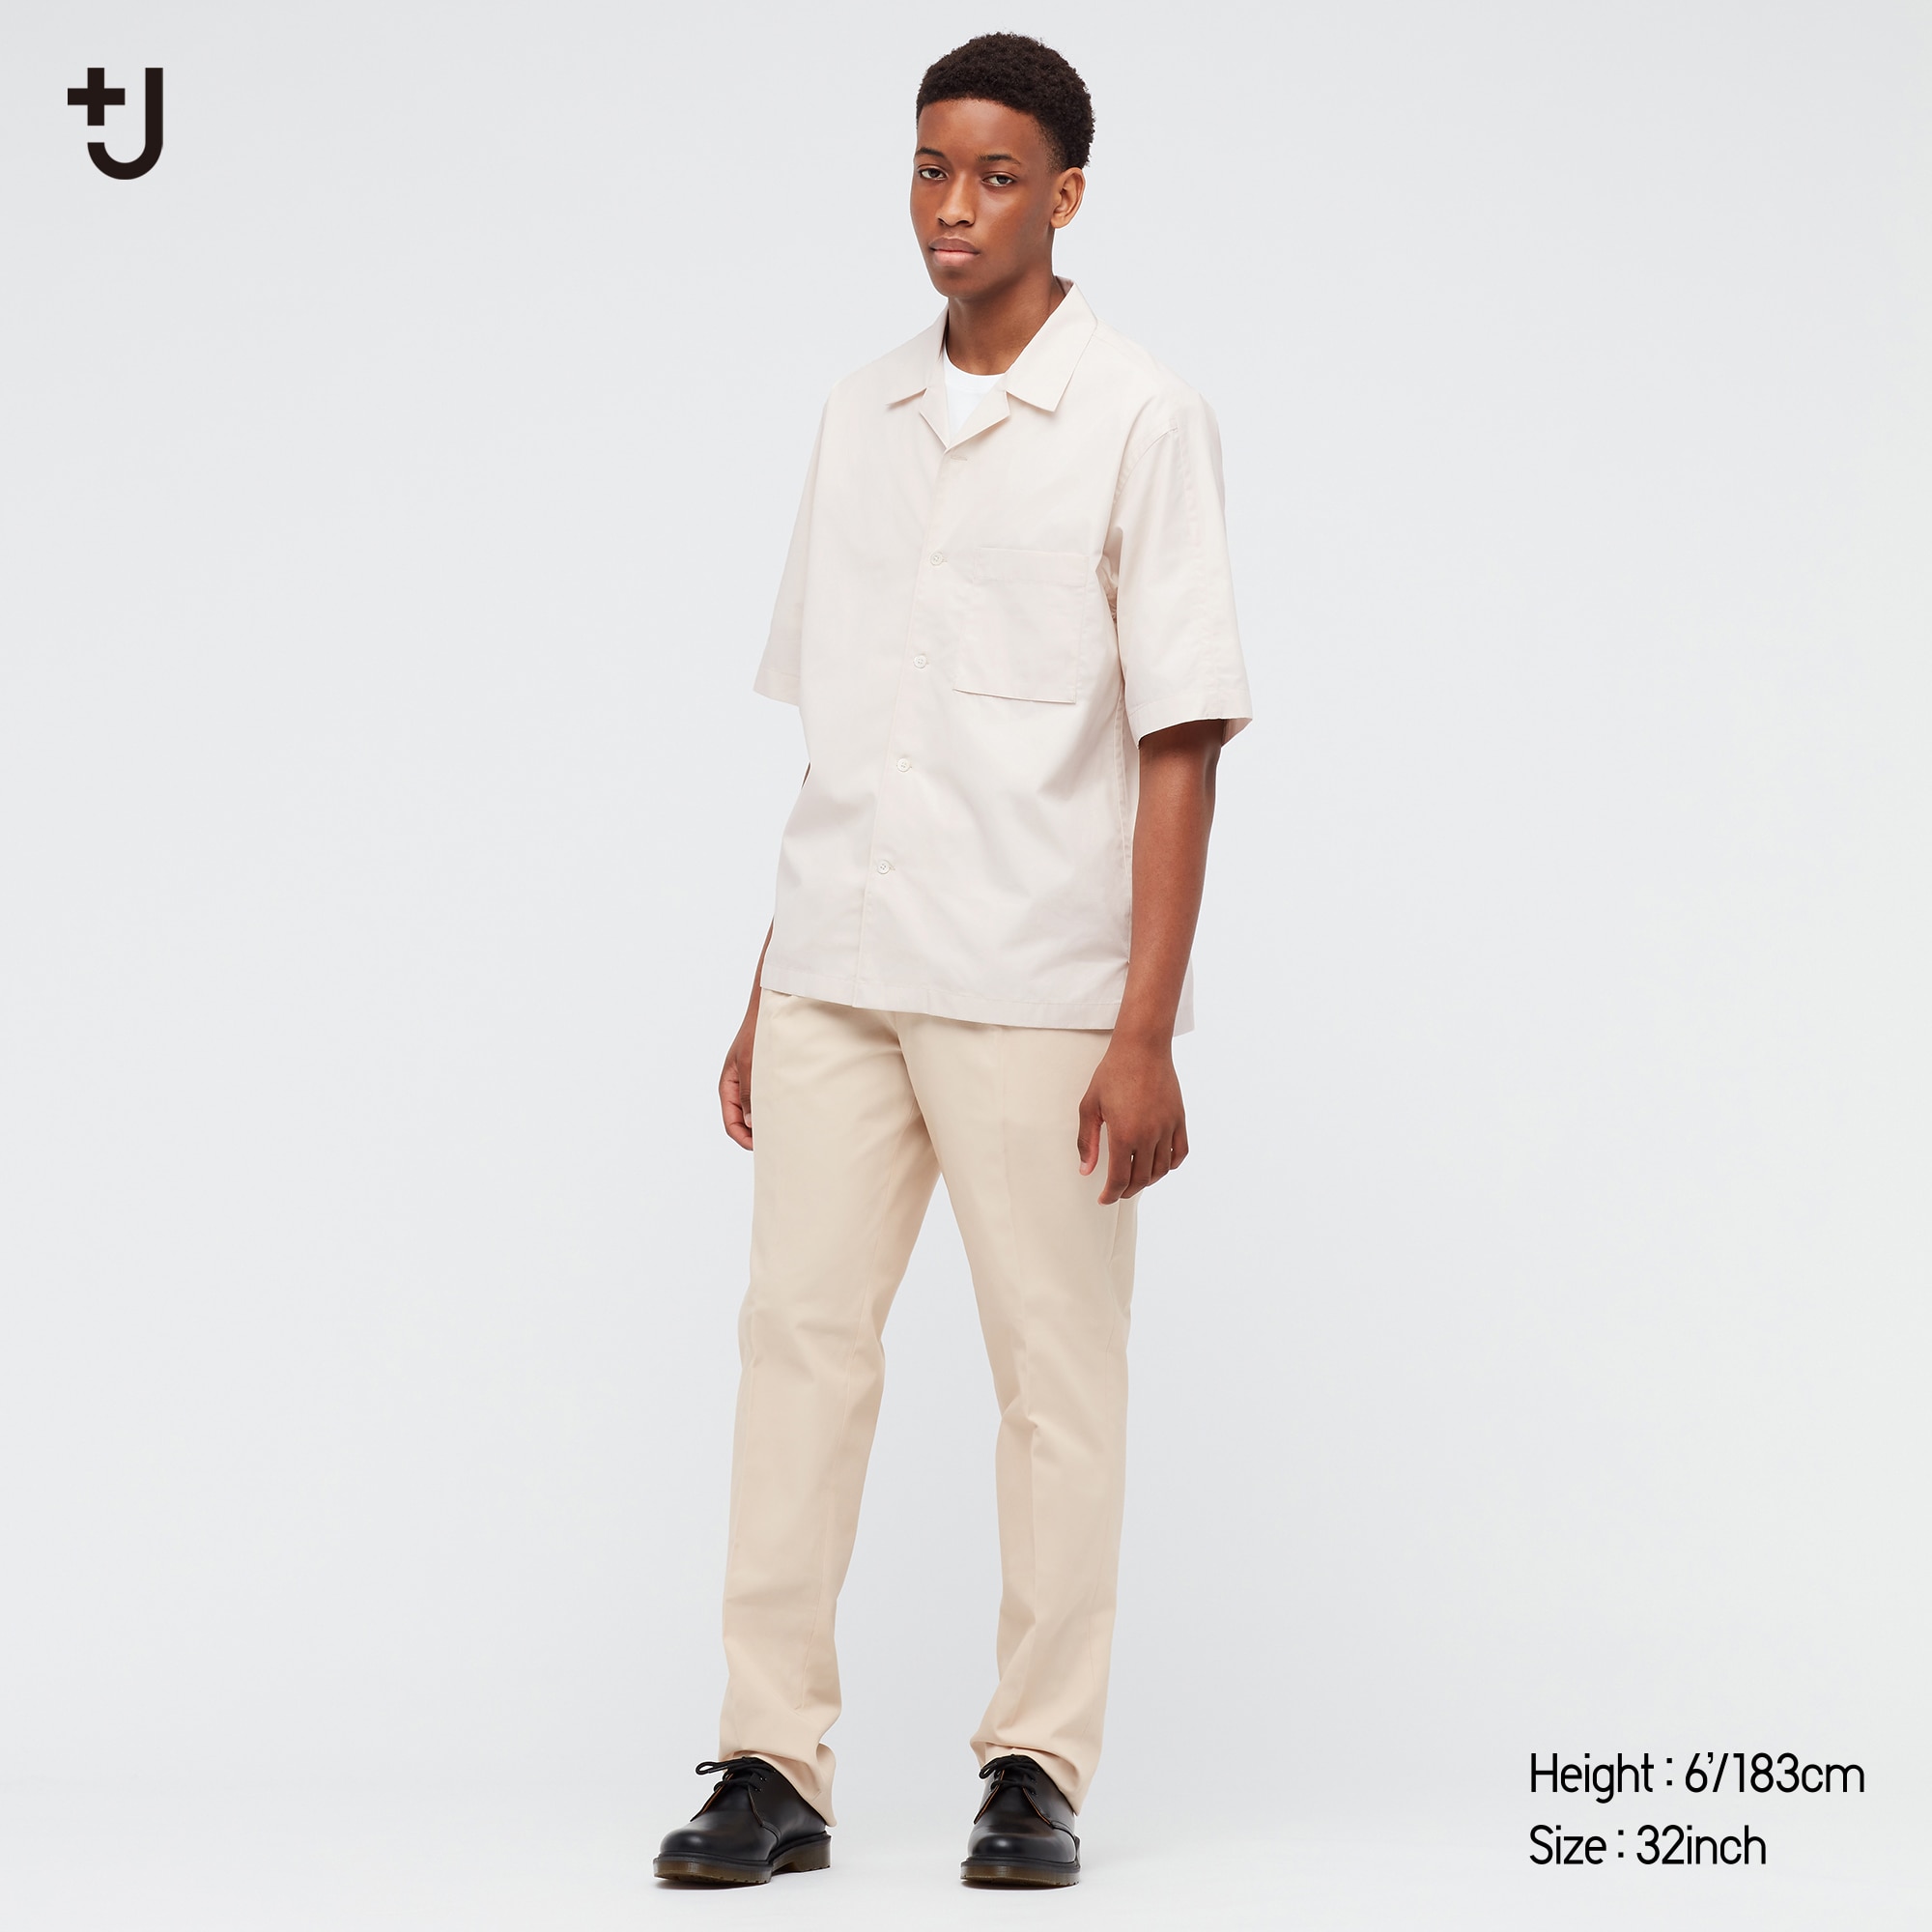 Outfit ideas of「+J Pleated Tapered Pants」| UNIQLO US